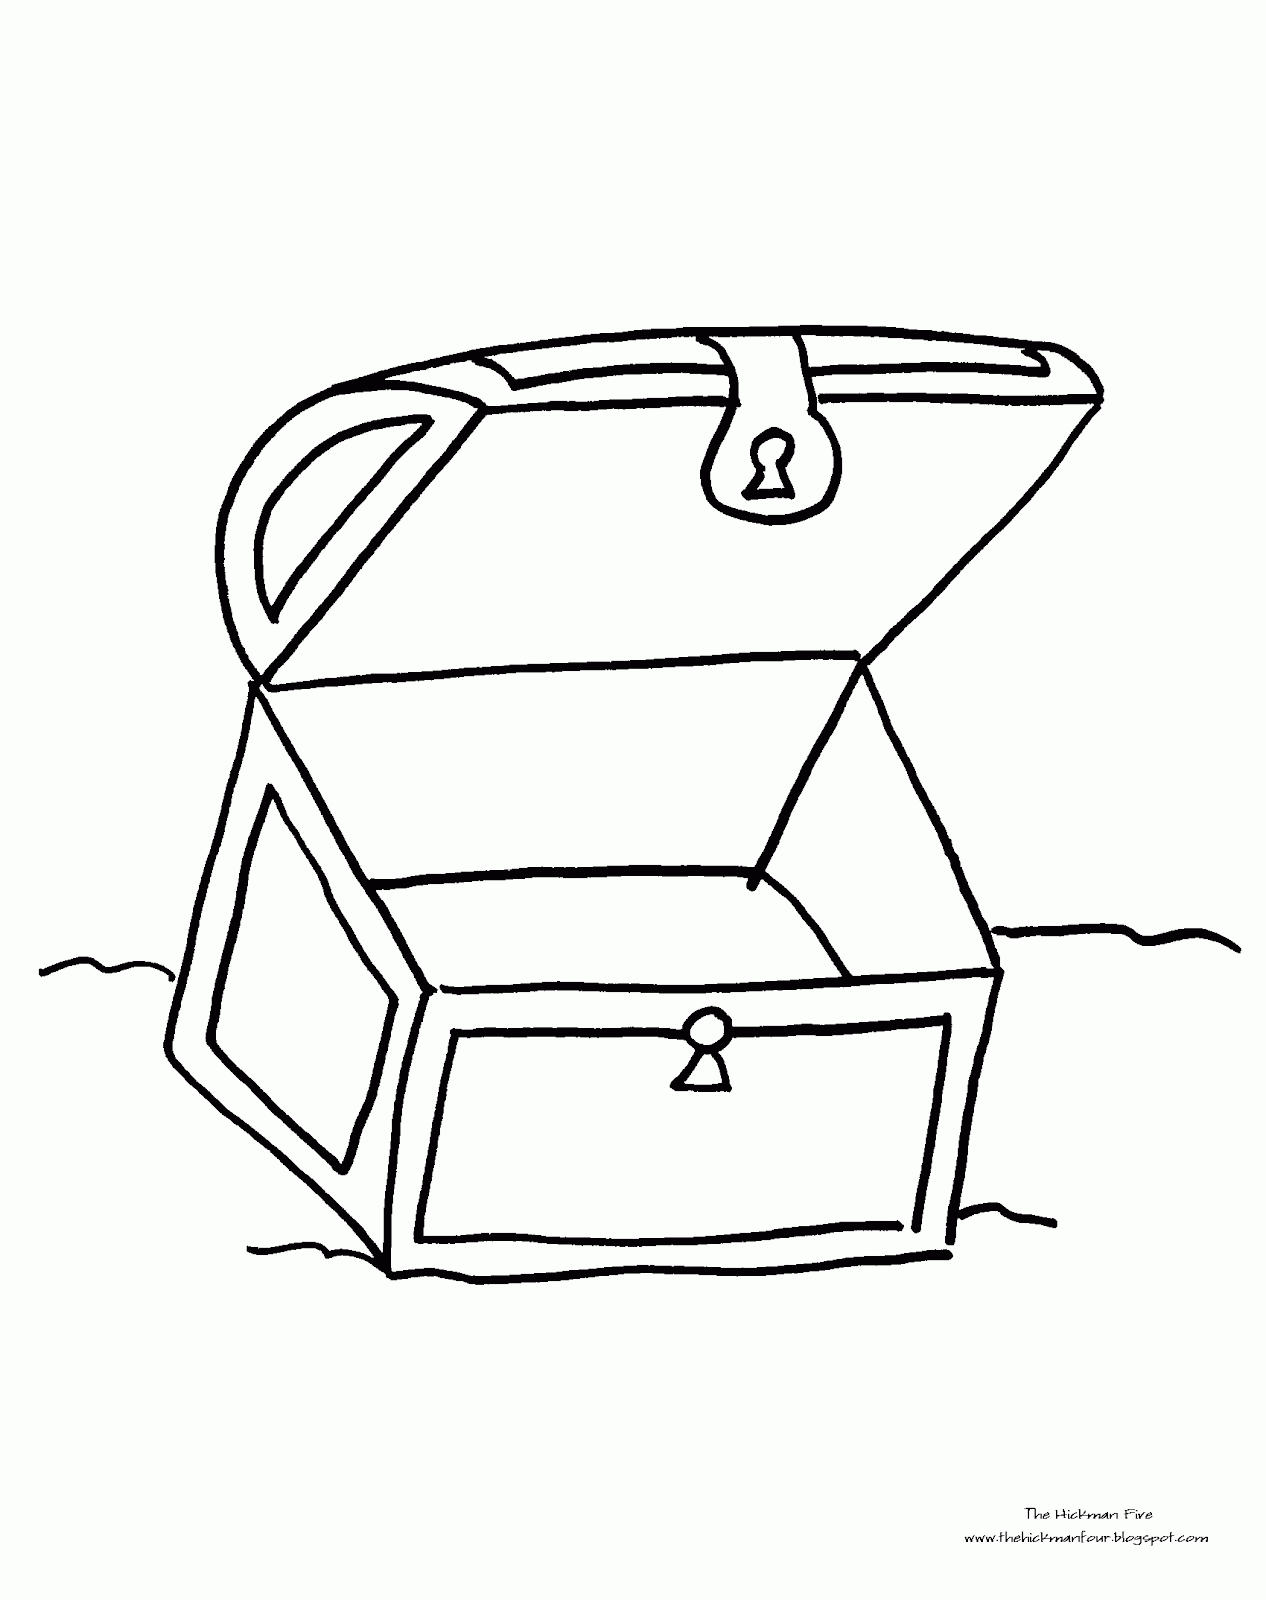 Treasure Chest Coloring Pages - Coloring Coloring Pages For Kids